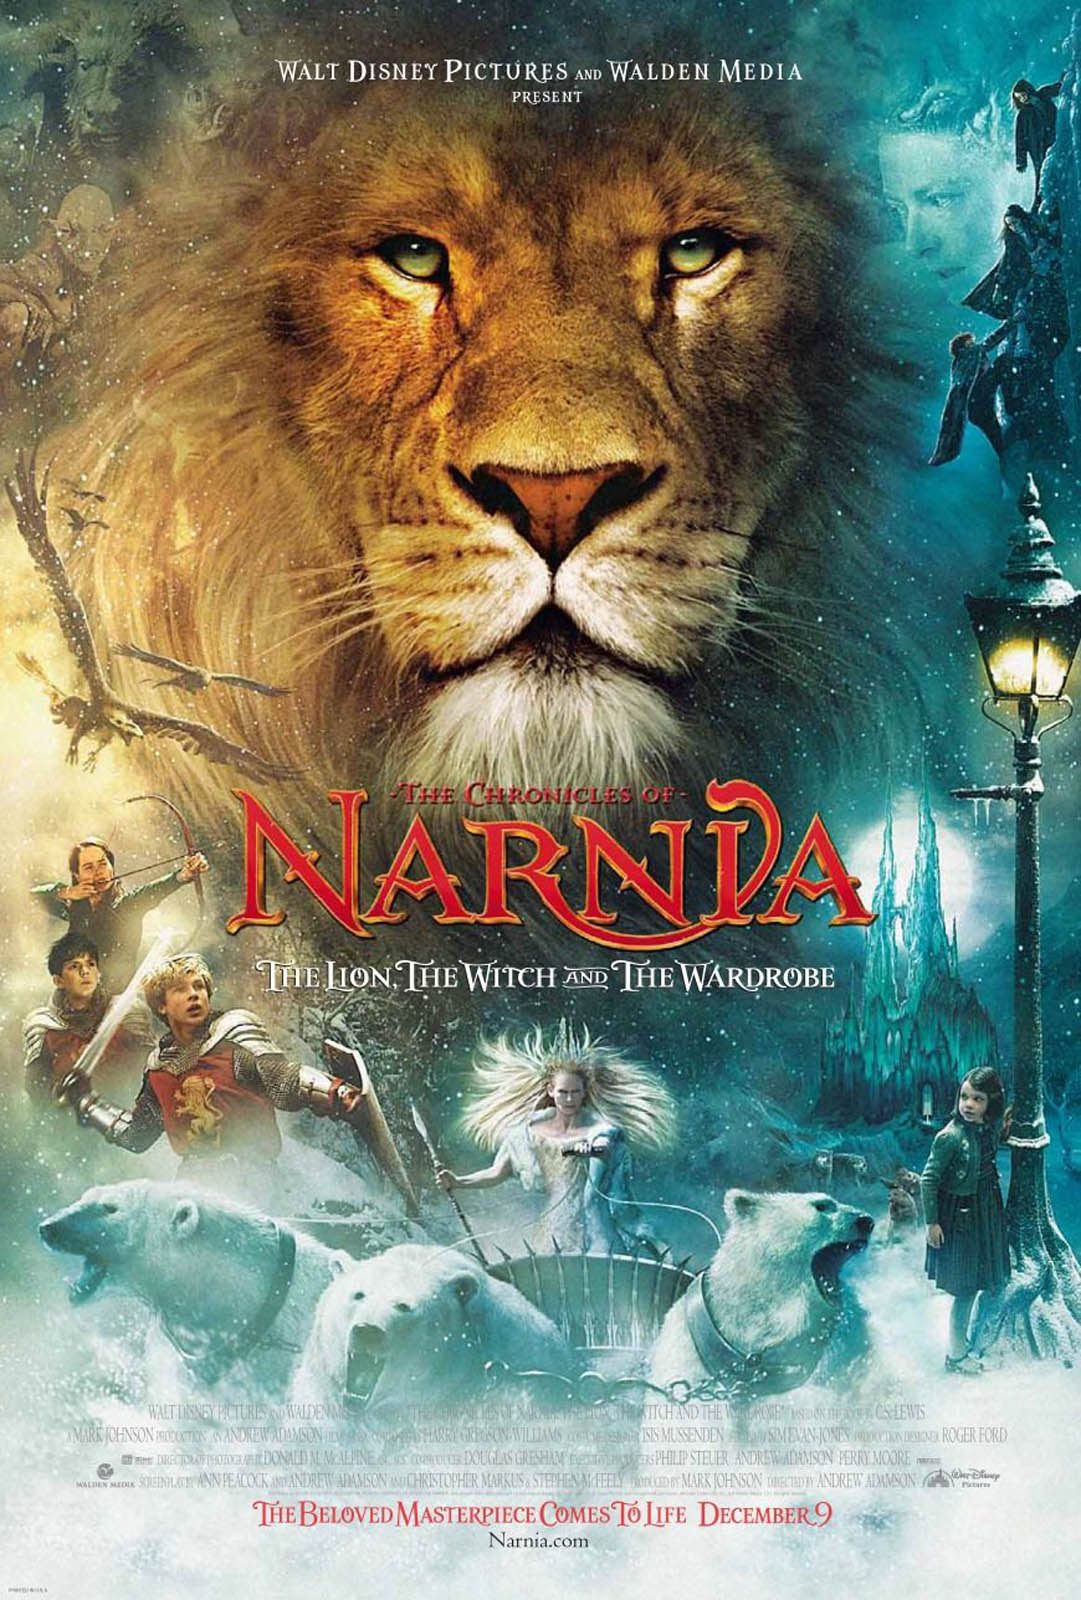 CHRONICLES OF NARNIA: THE LION, THE WITCH AND THE WARDROBE, THE